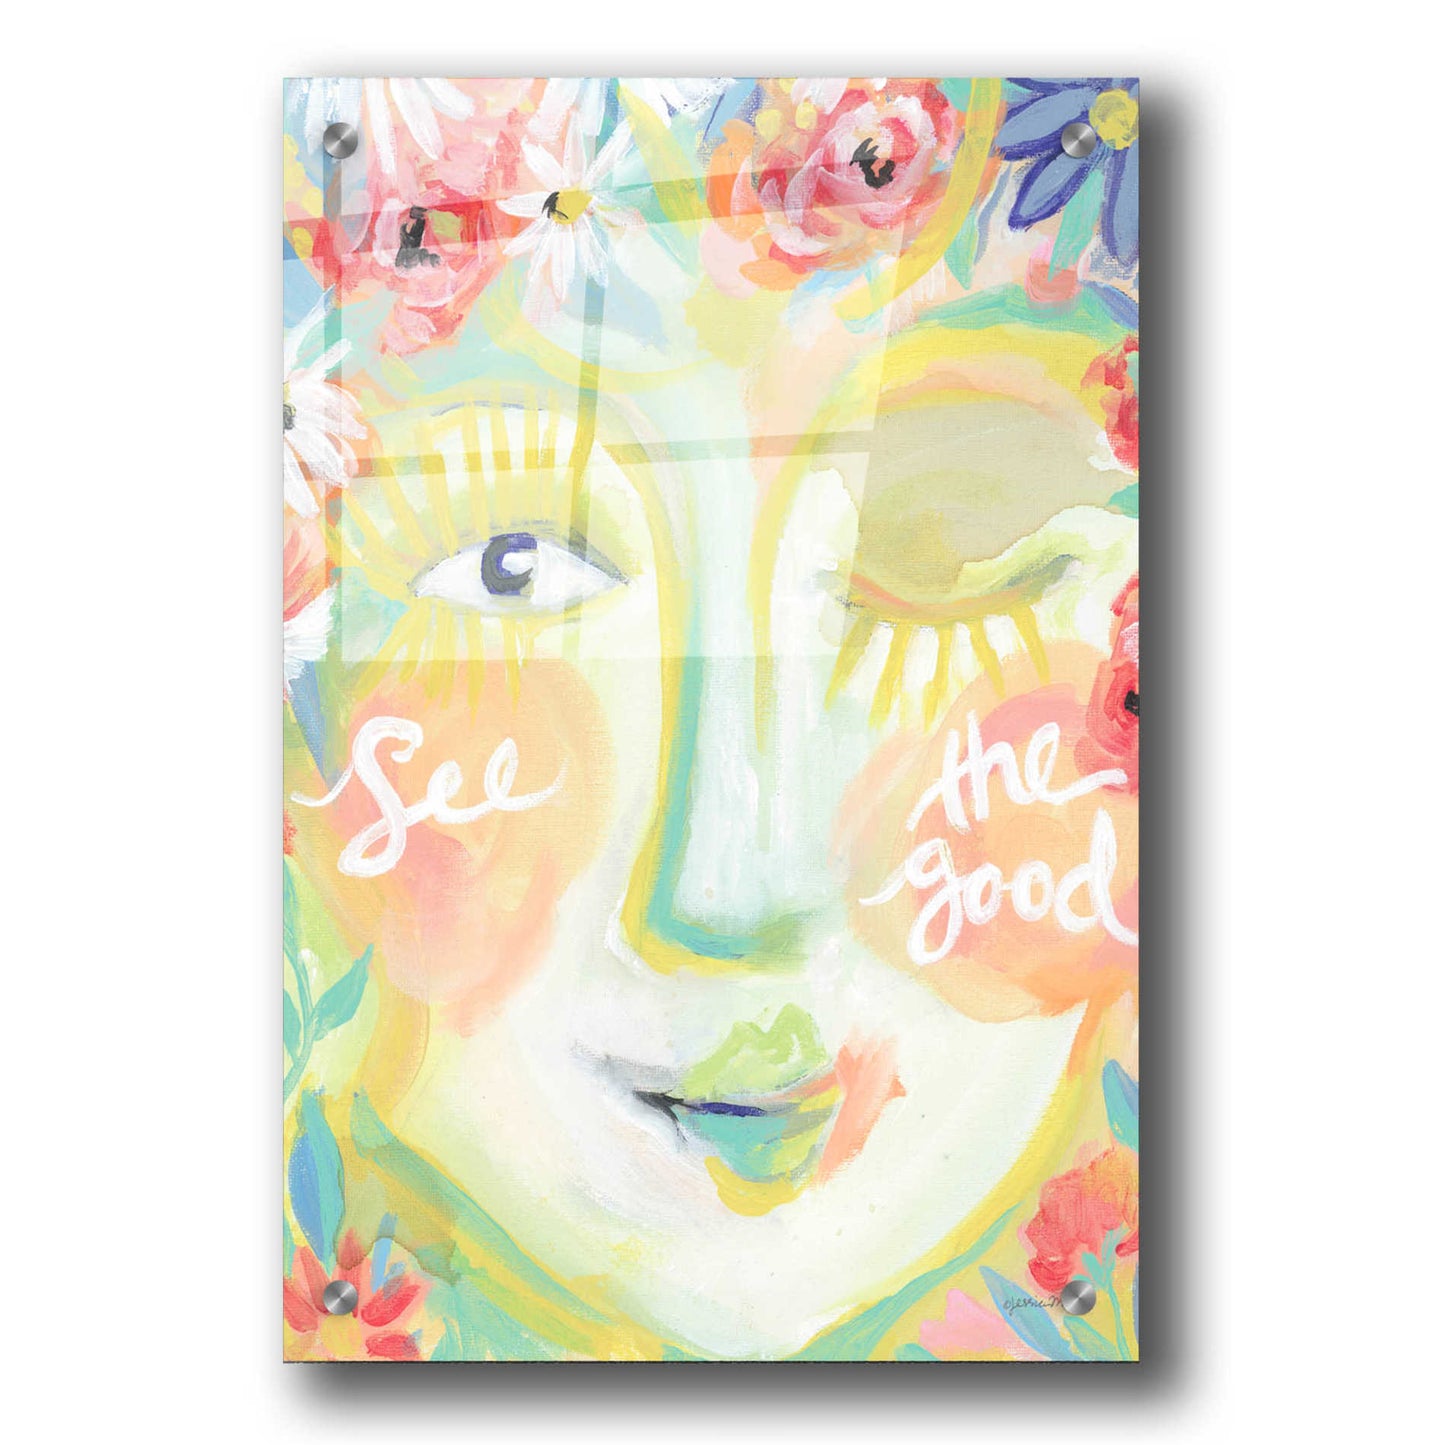 Epic Art 'See the Good' by Jessica Mingo, Acrylic Glass Wall Art,24x36